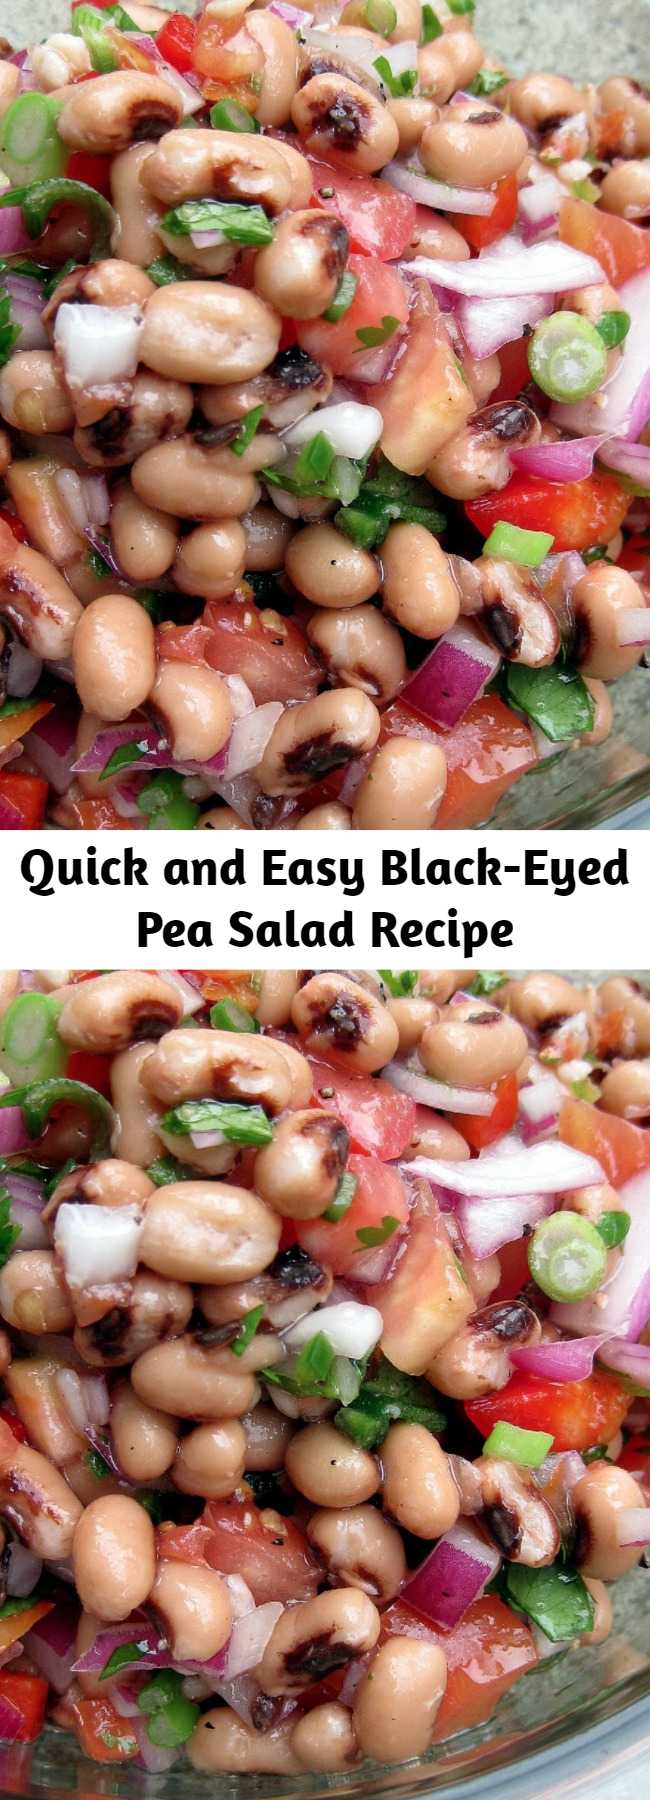 Quick and Easy Black-Eyed Pea Salad Recipe - This bean salad would be a hit on any occasion this summer. It’s quick, inexpensive, and easy. And it’s addictive.